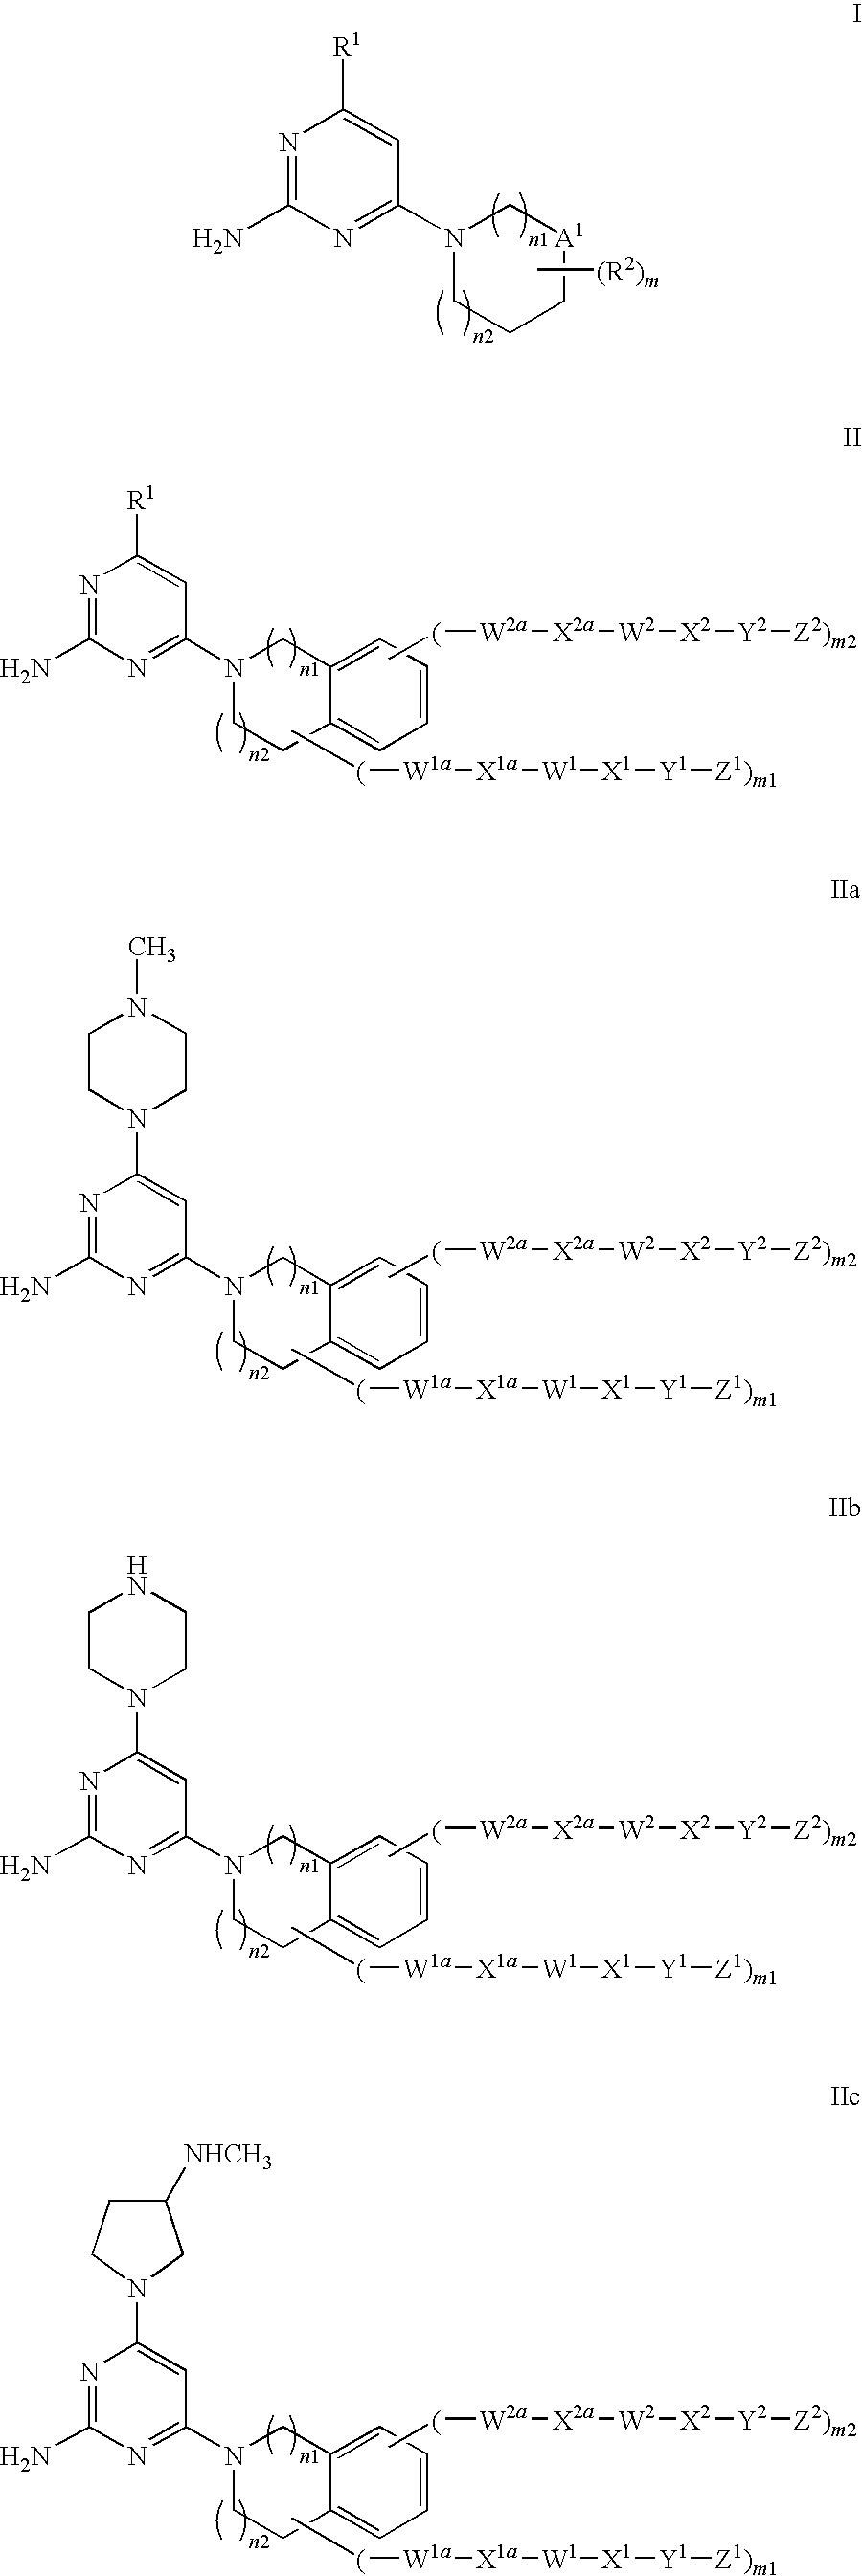 Substituted Heterocyclic Compounds